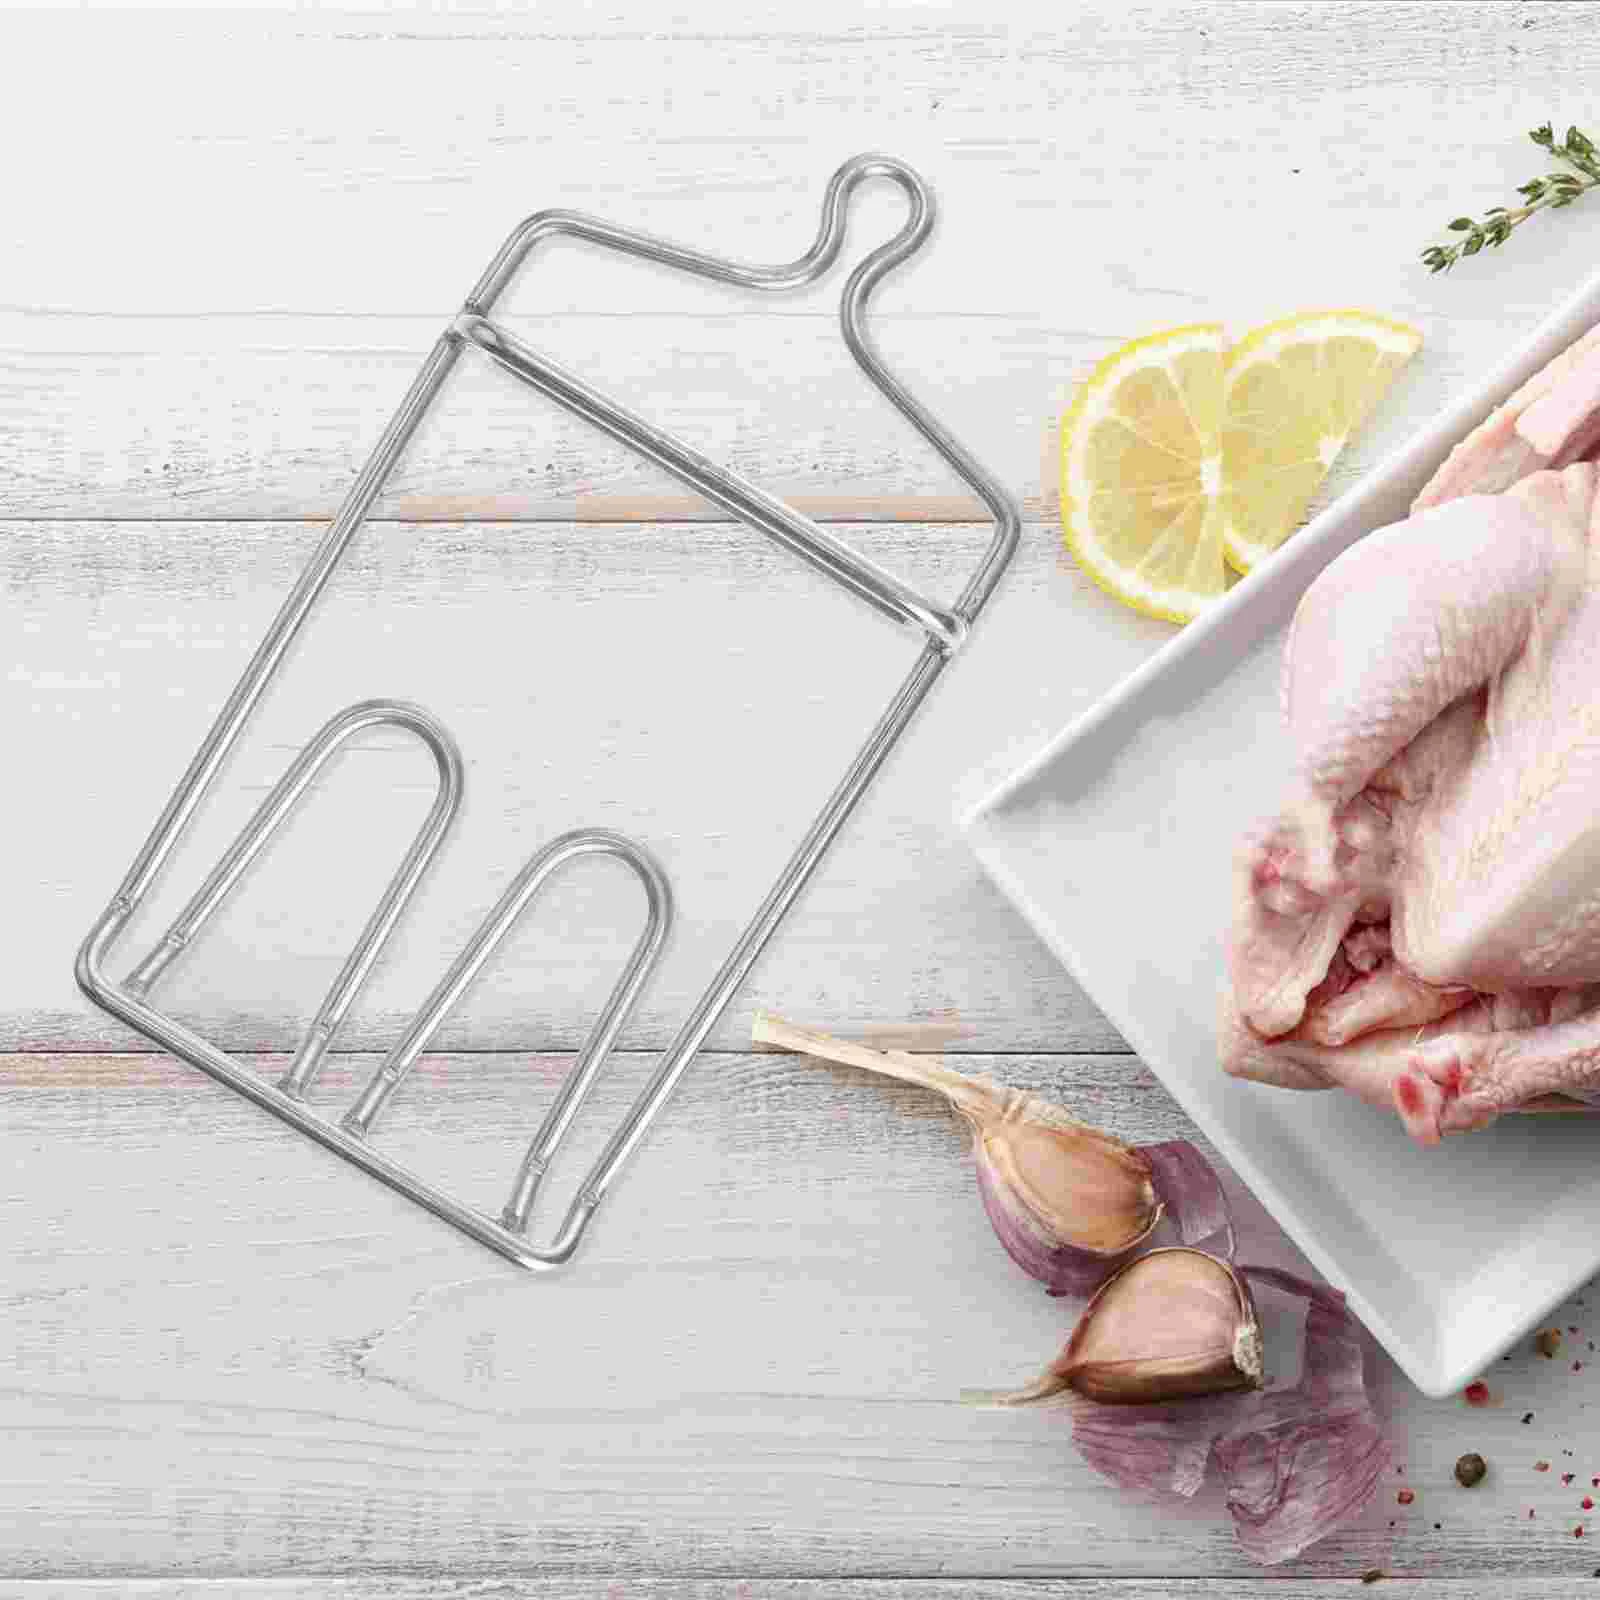 

Hook Hooks Meat Smoker Chicken Poultry Hanger Grill Top Griddle Outdoor Hanging Slaughter Bacon Roast Butcher Grill Rack